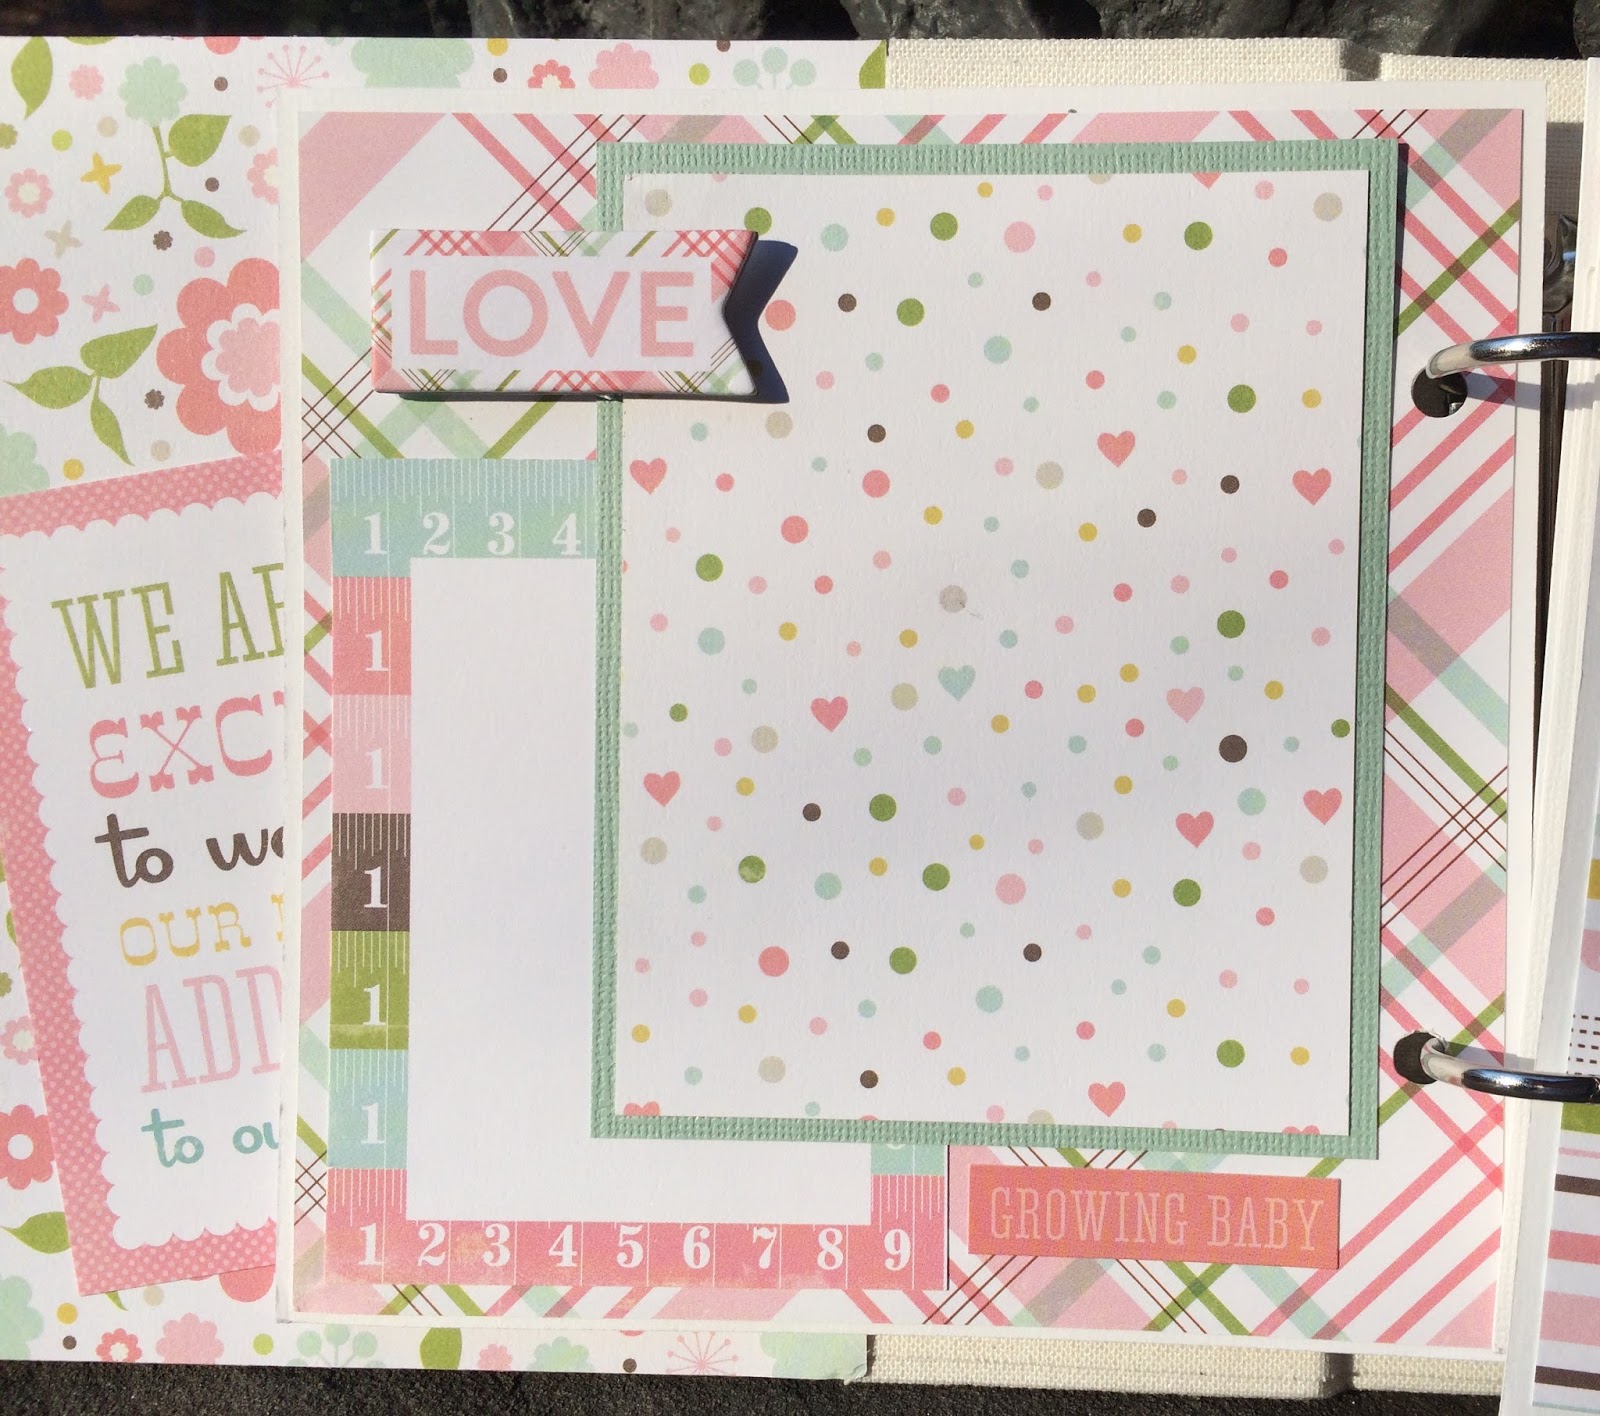 Artsy Albums Scrapbook Album and Page Layout Kits by Traci Penrod: Baby ...